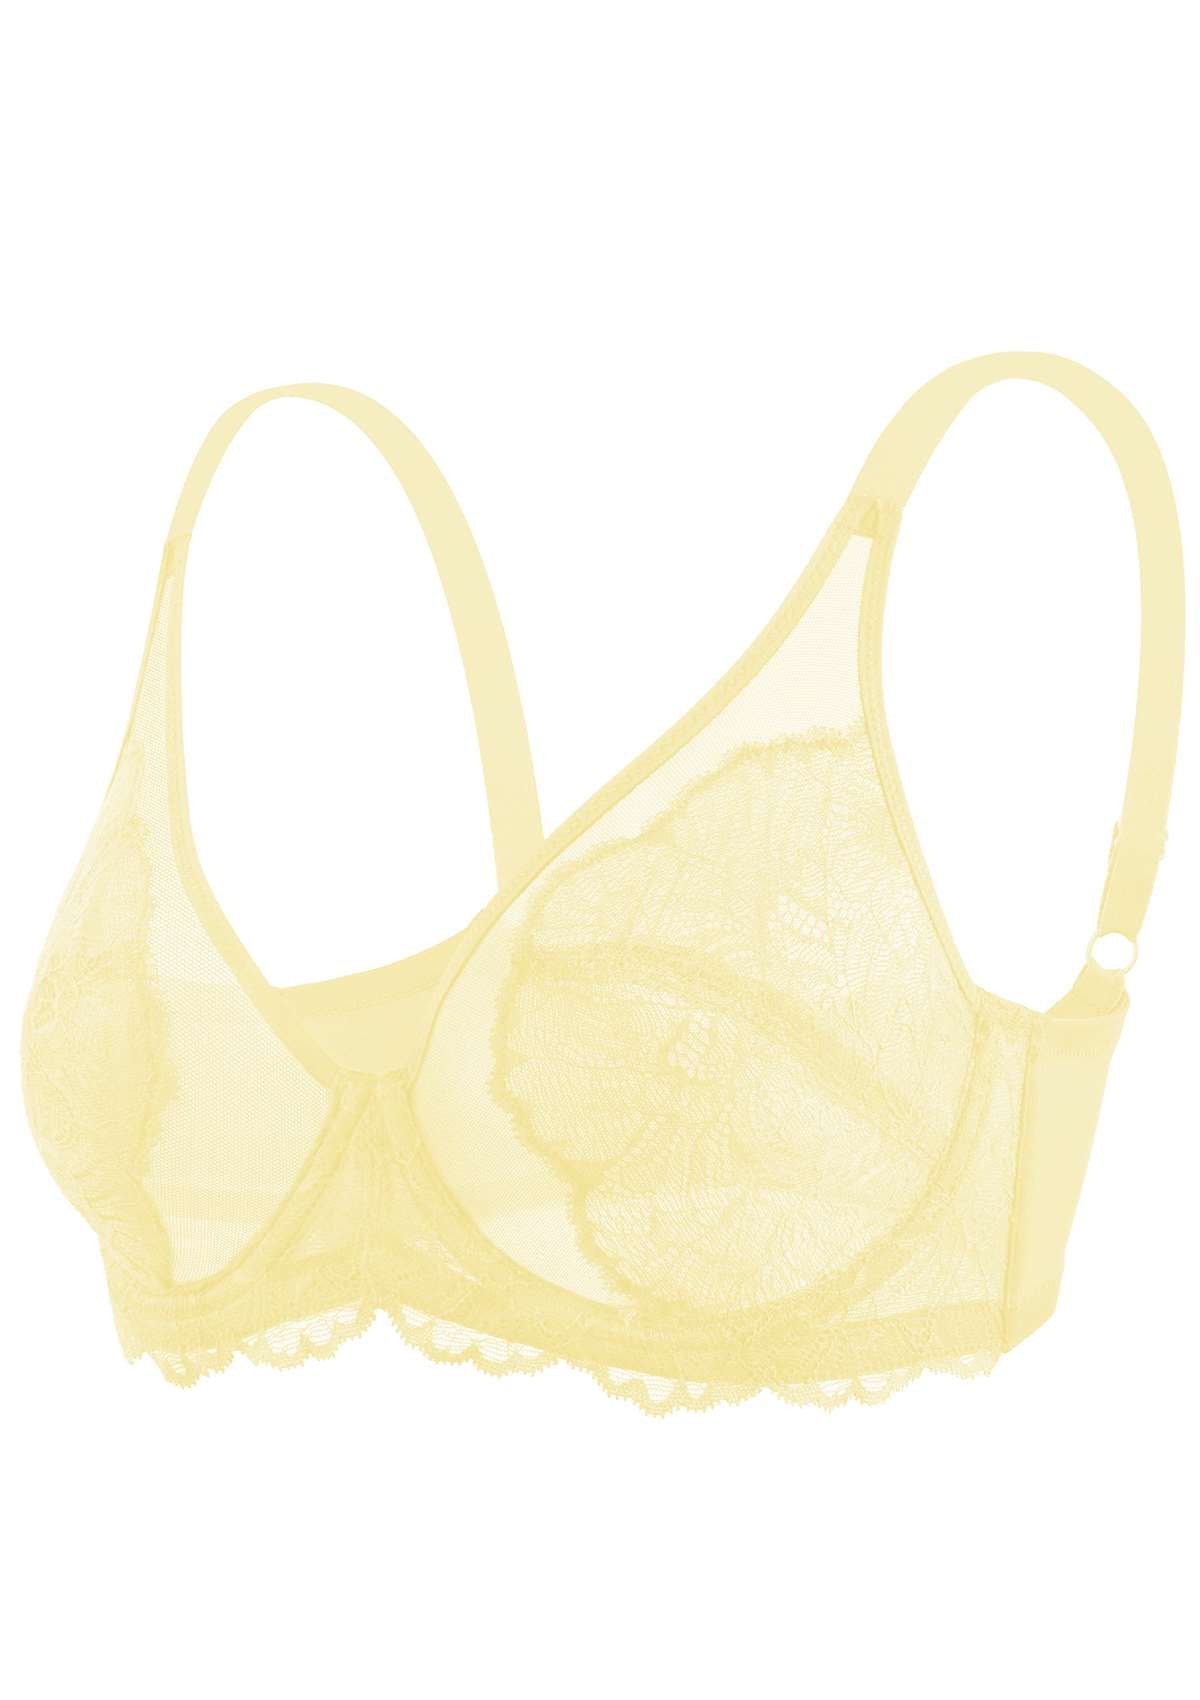 HSIA Blossom Full Coverage Side Support Bra: Designed For Heavy Busts - Beige / 44 / DDD/F